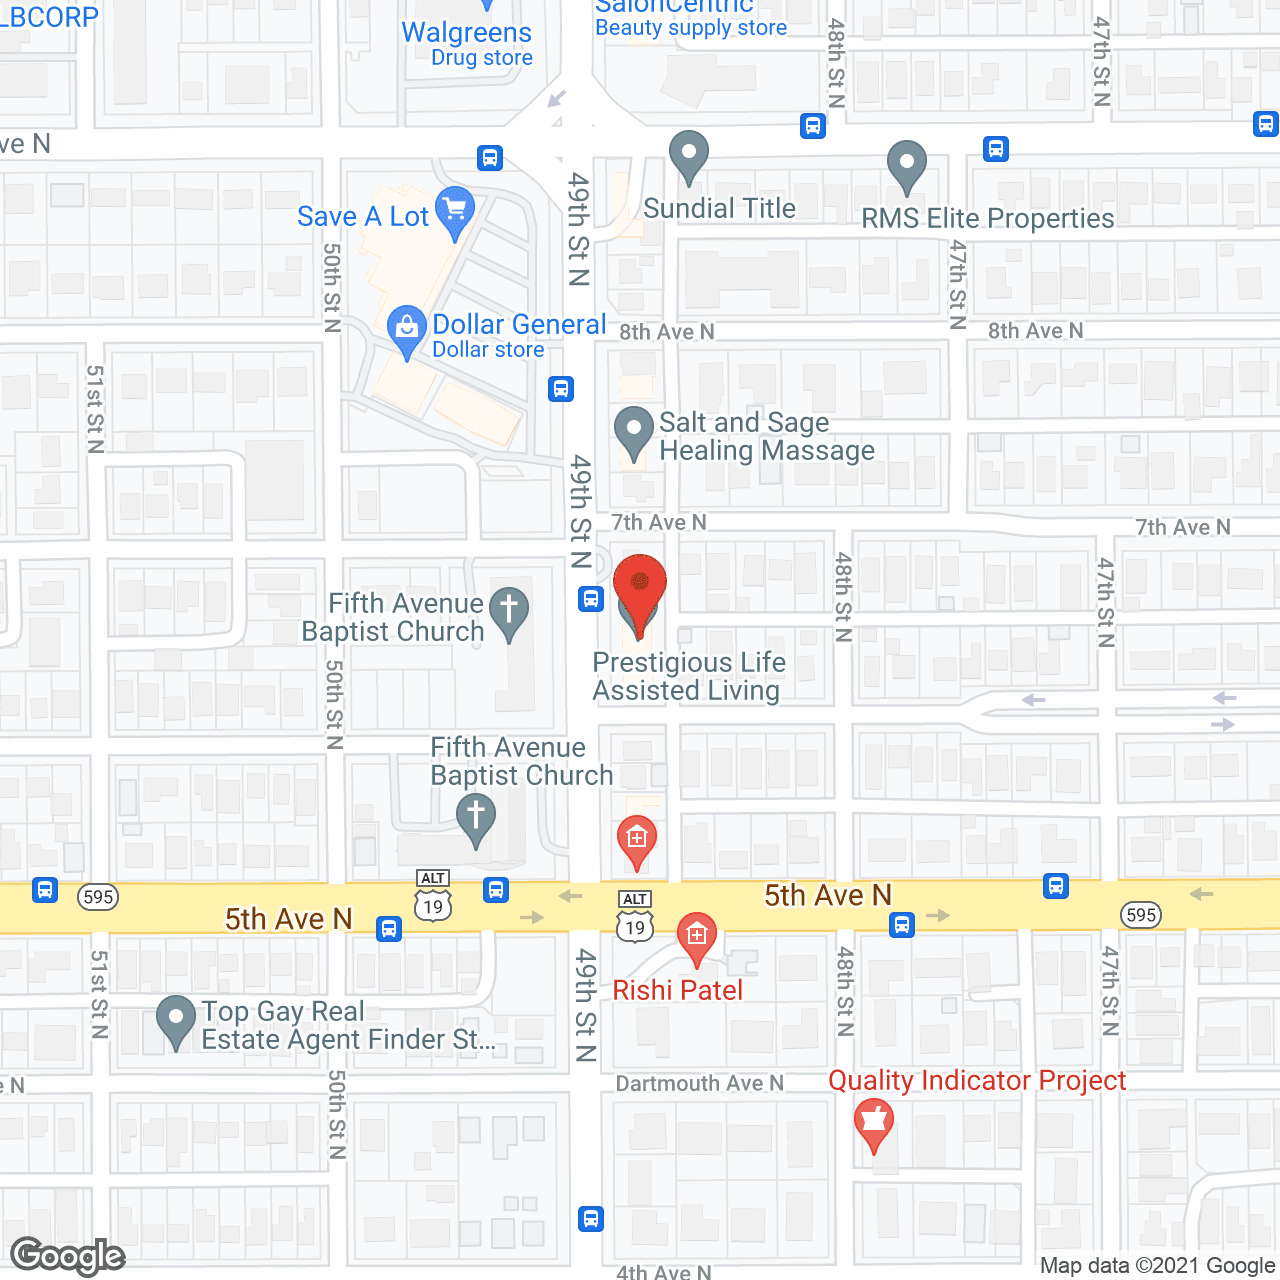 Prestigious Life Assisted Living in google map